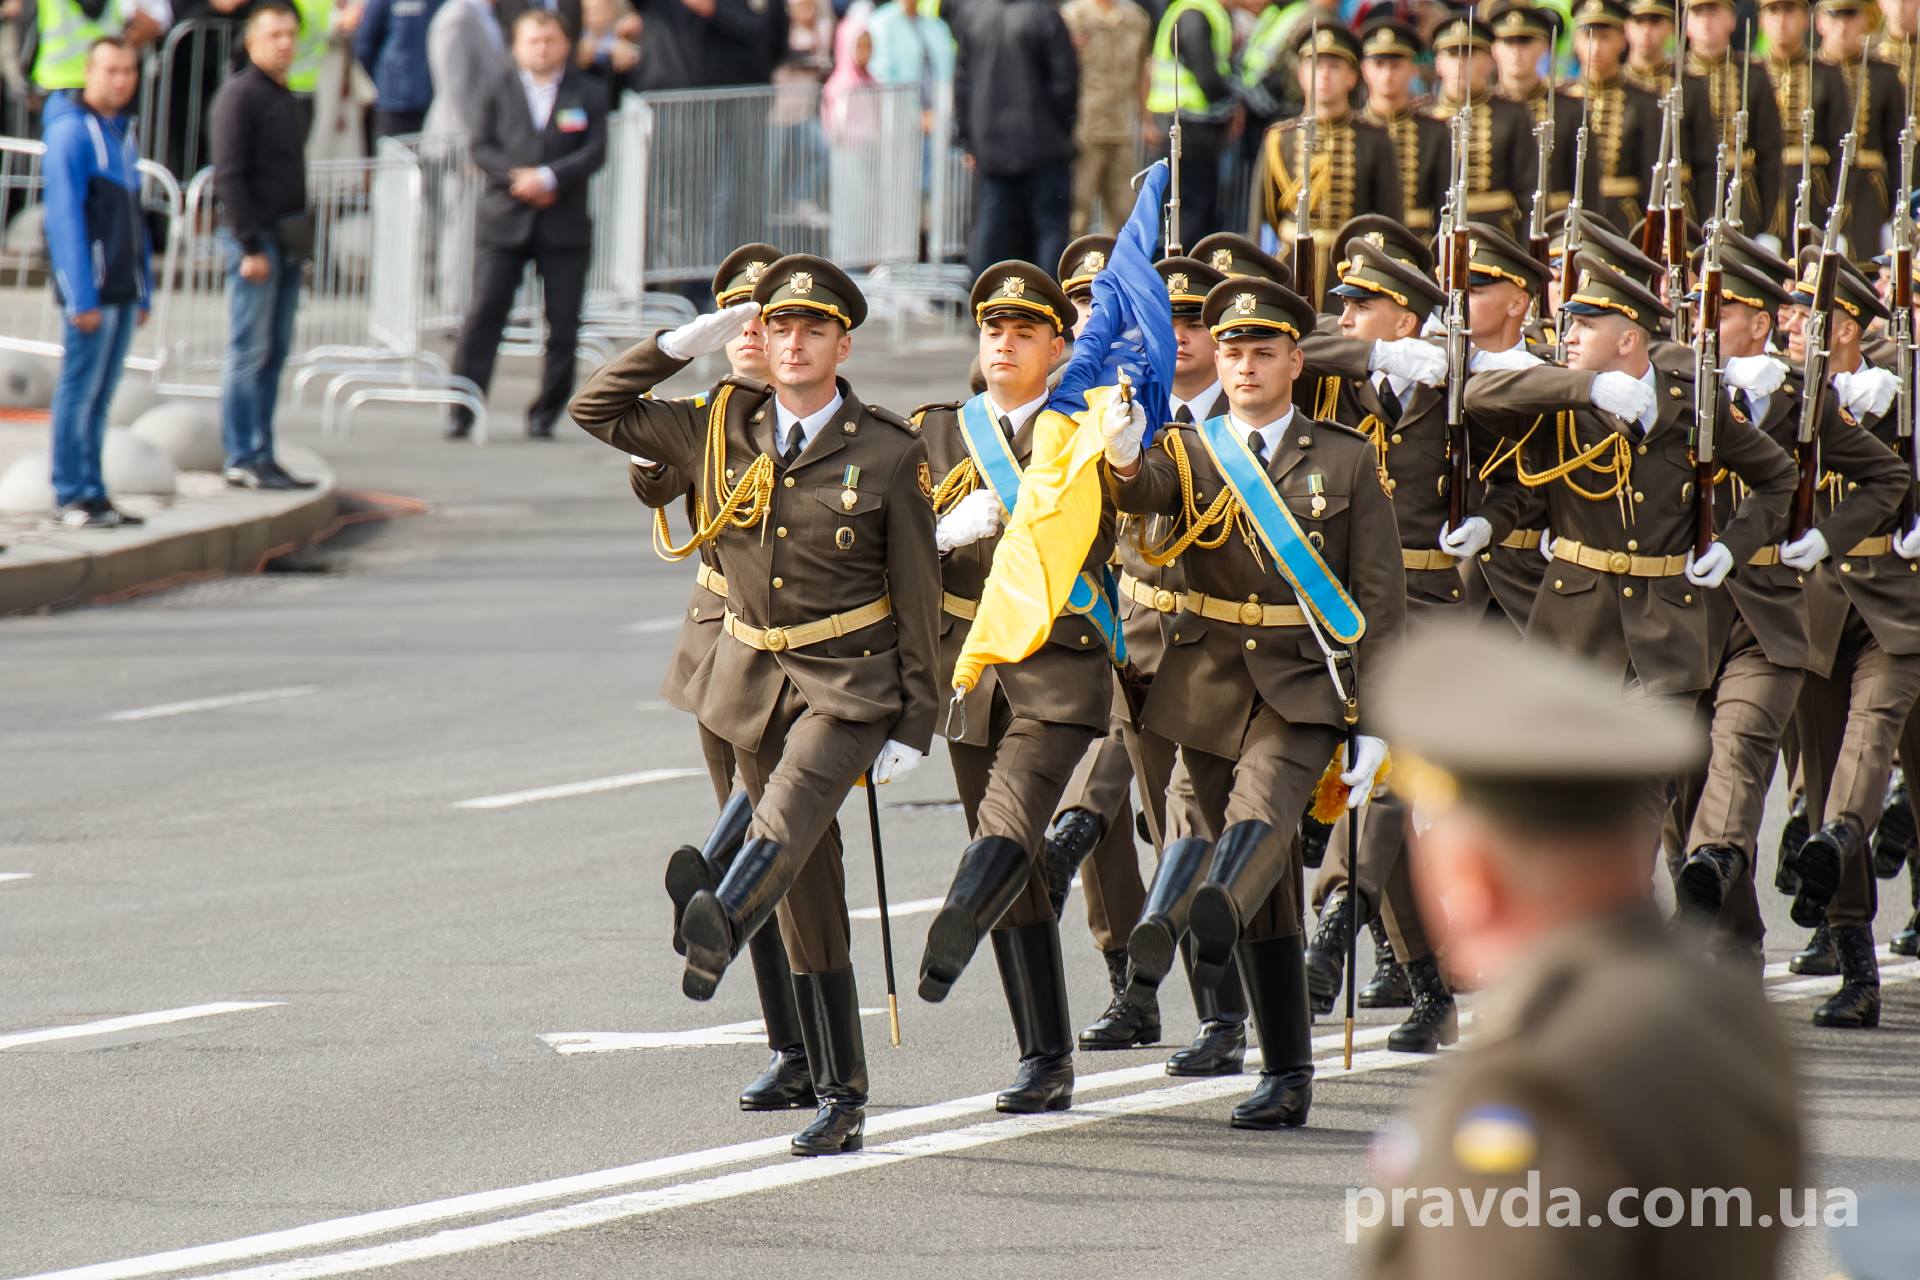 Divisions from eight NATO countries attend military parade on Ukraine’s Independence Day